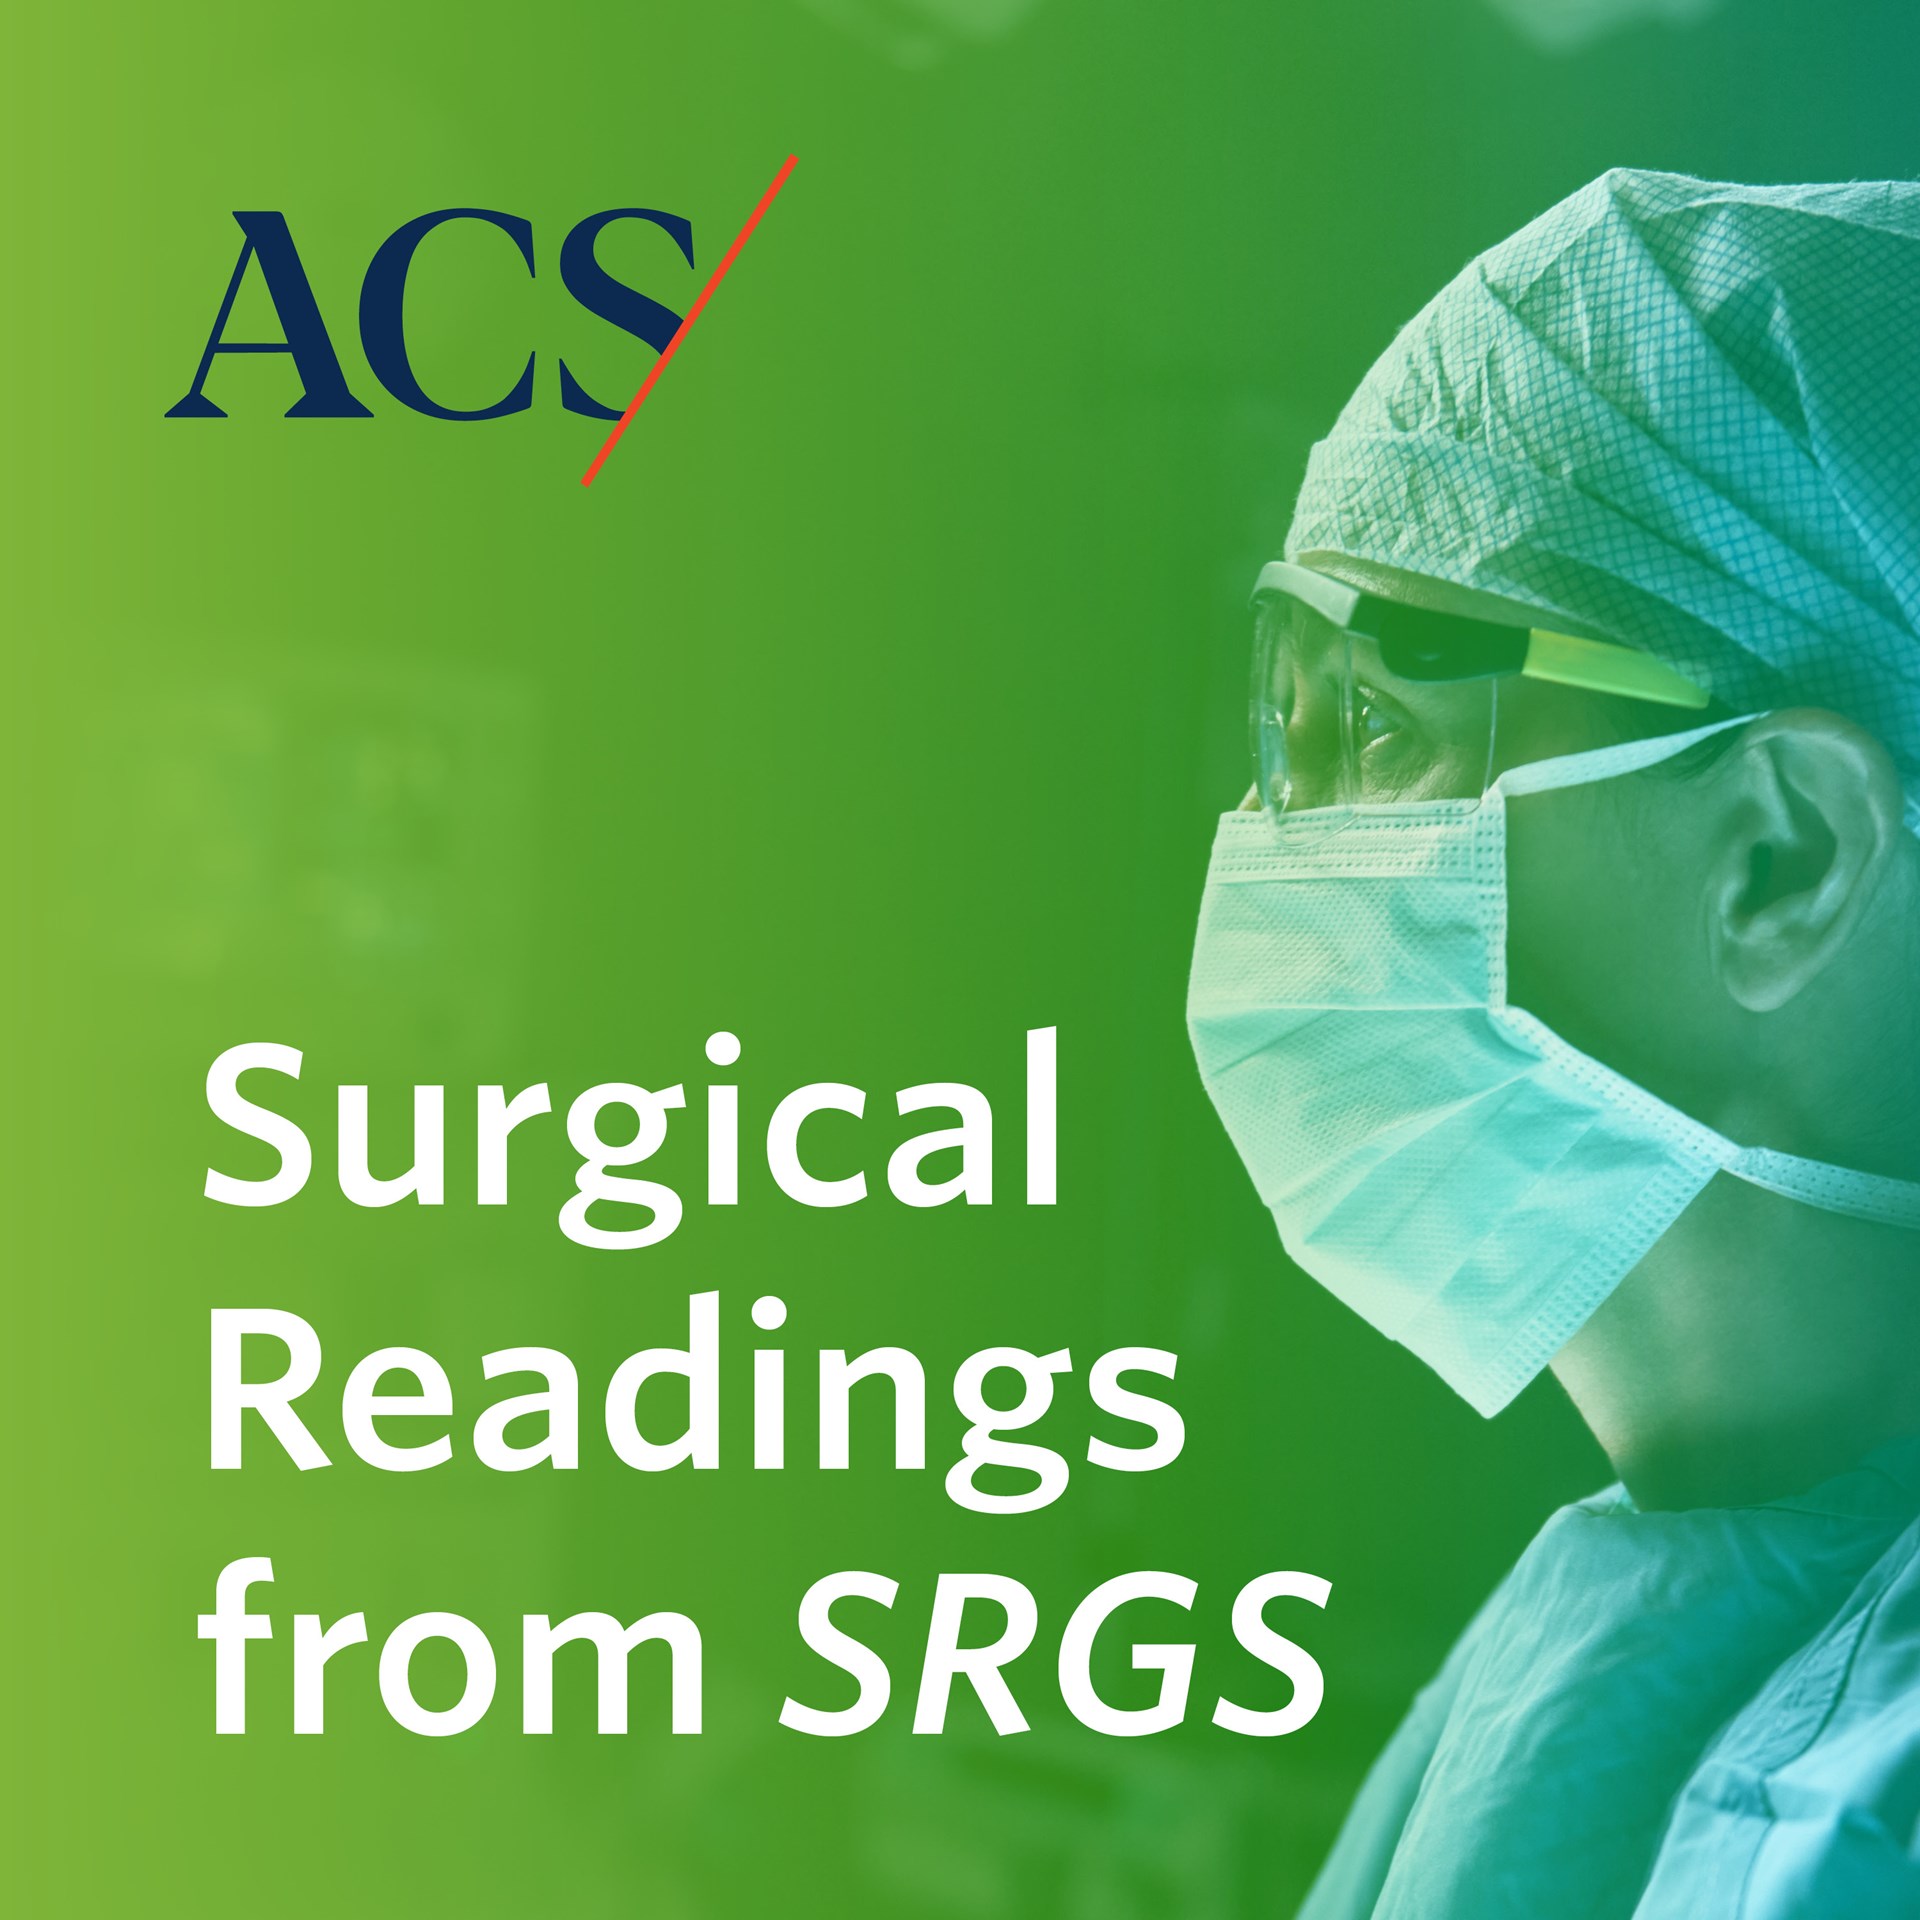 Colorectal Surgery Expert Discusses Important Concepts in Surgical Readings from SRGS